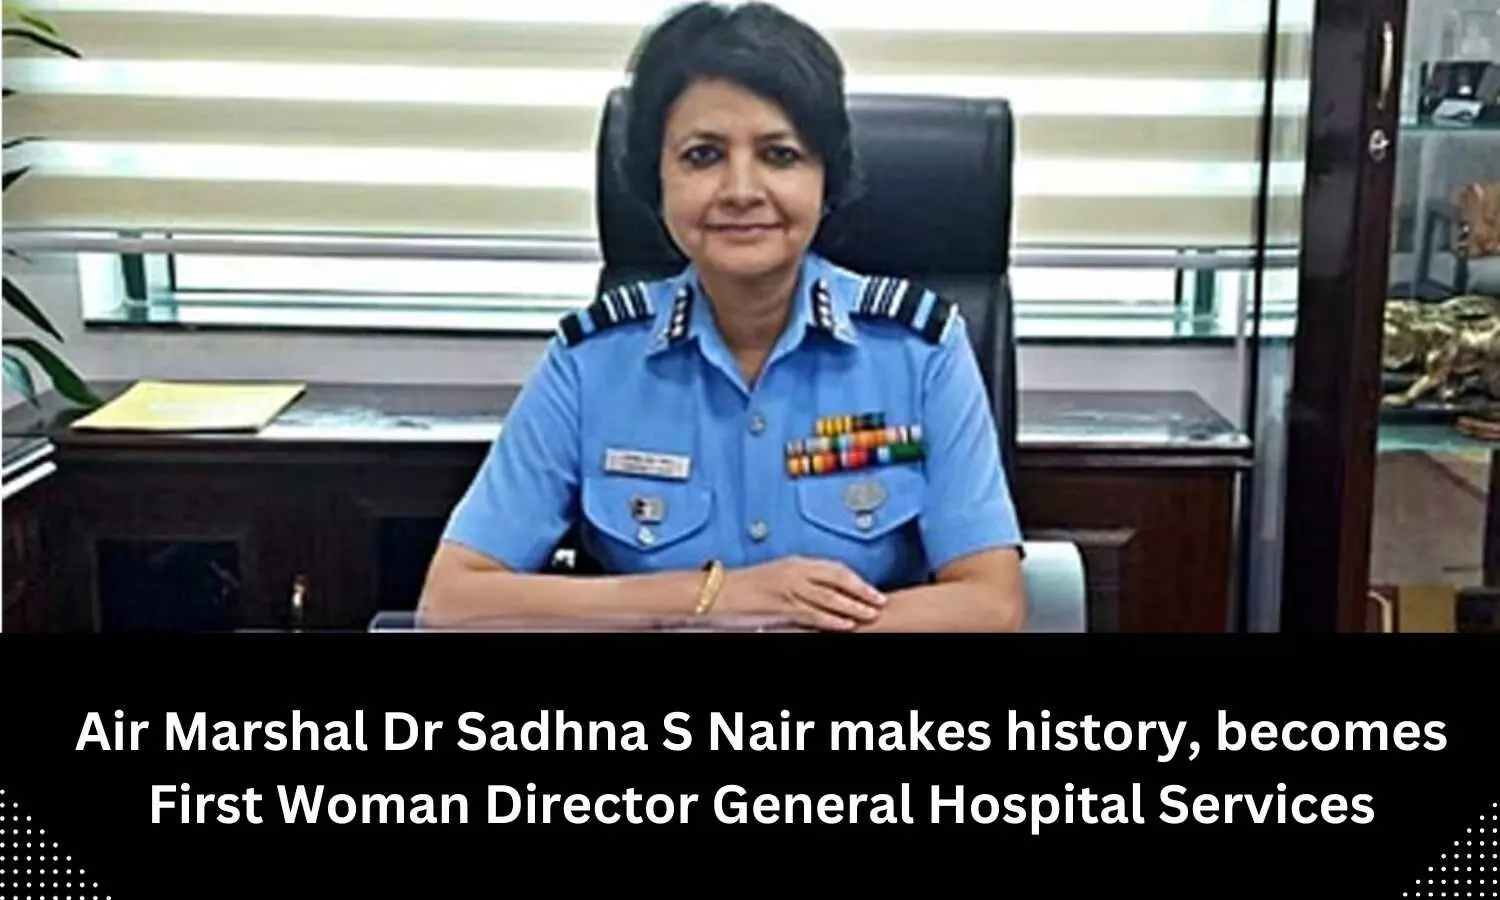 Air Marshal Sadhna S Nair appointed as Director General Hospital Services